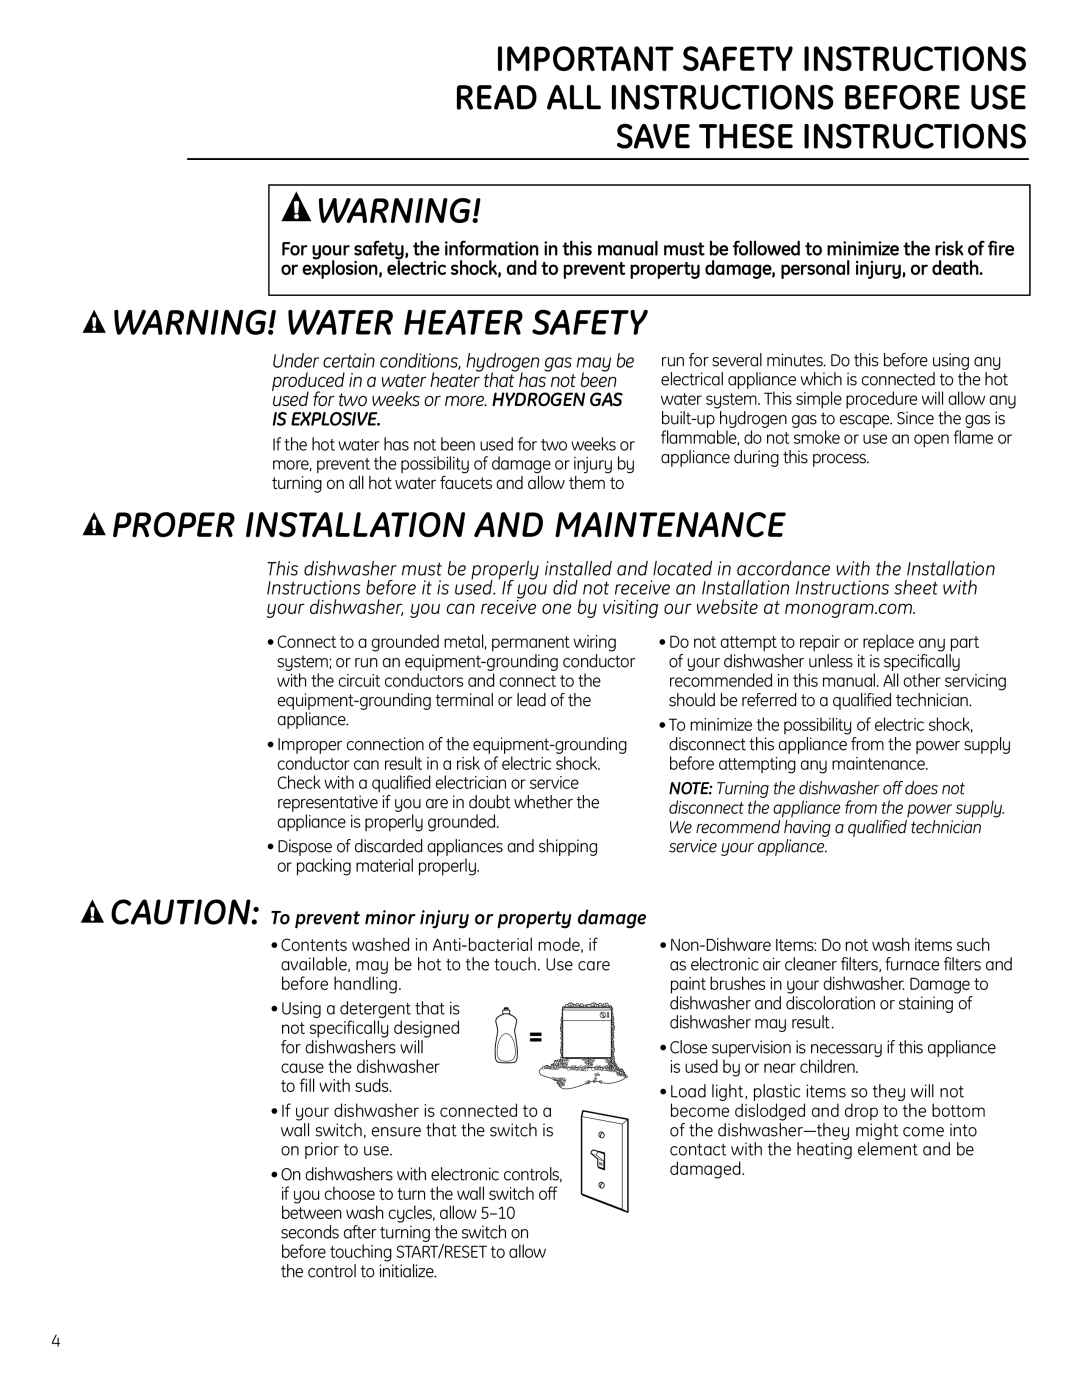 GE Monogram ZBD0710 owner manual Proper Installation And Maintenance, Is Explosive, Warning! Water Heater Safety 